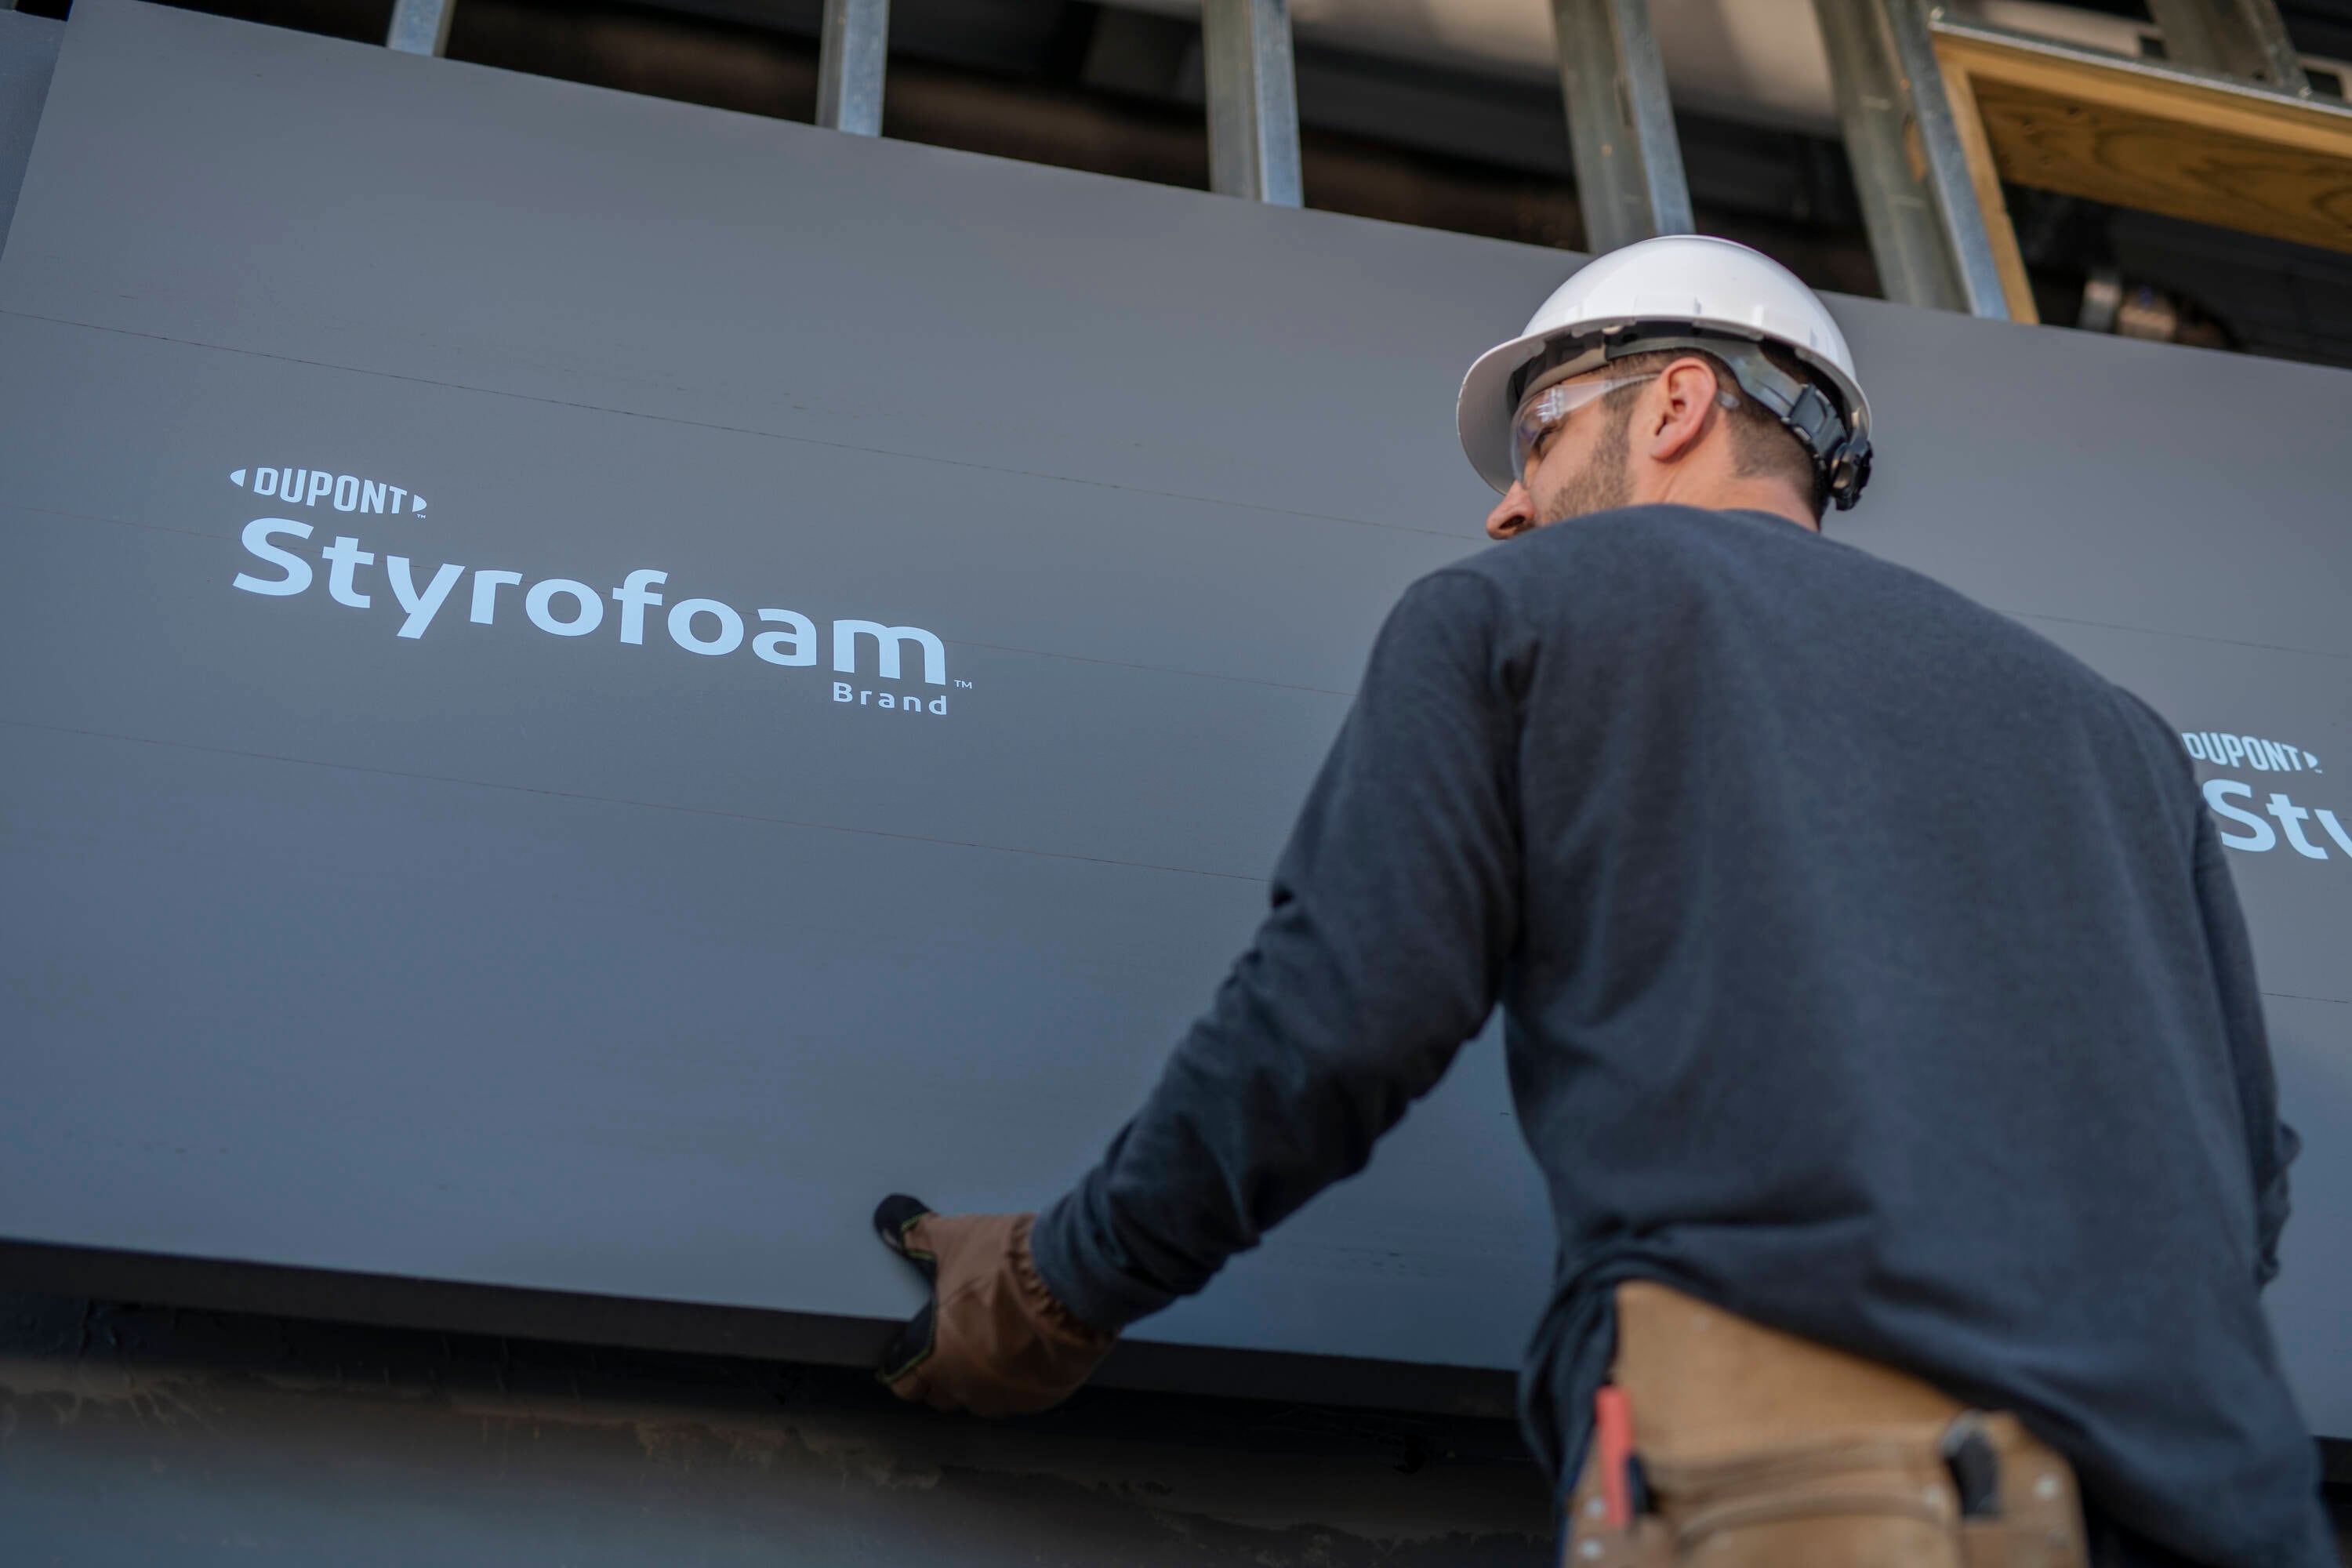 STYROFOAM R-4, 0.78-in x 4-ft x 8-ft Residential Sheathing Faced  Polystyrene Board Insulation in the Board Insulation department at